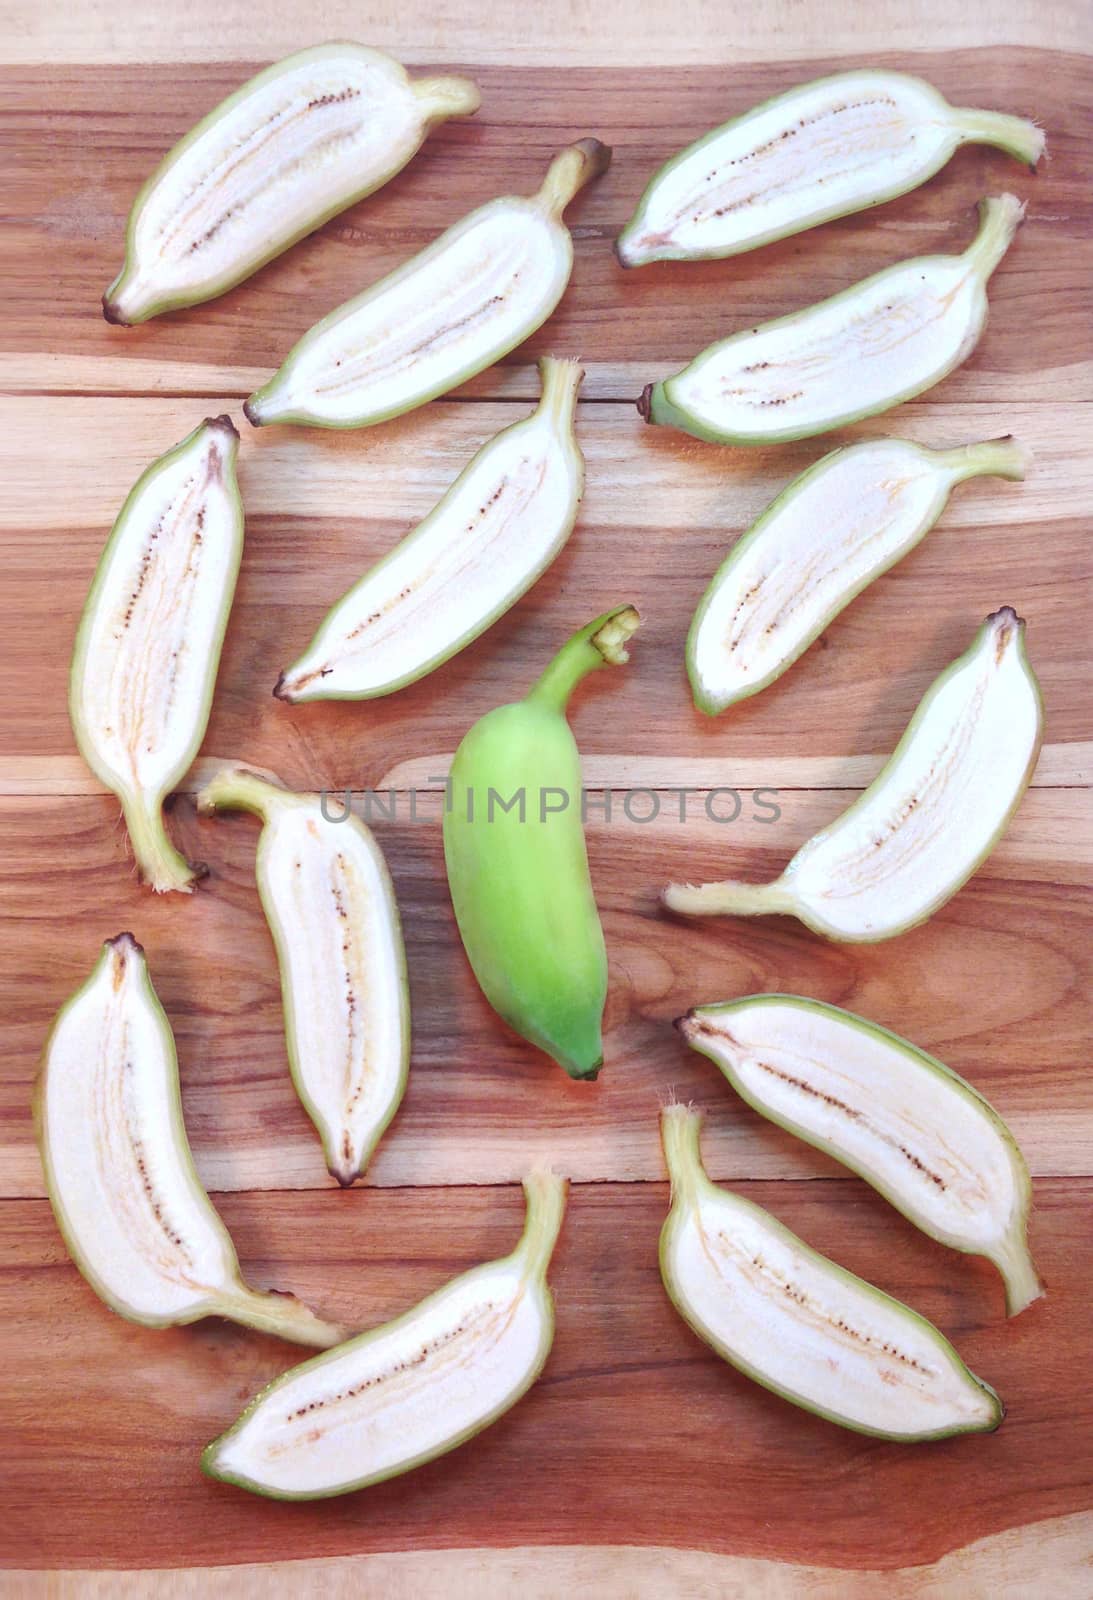 Green cultivated banana and piece of slices on wooden background